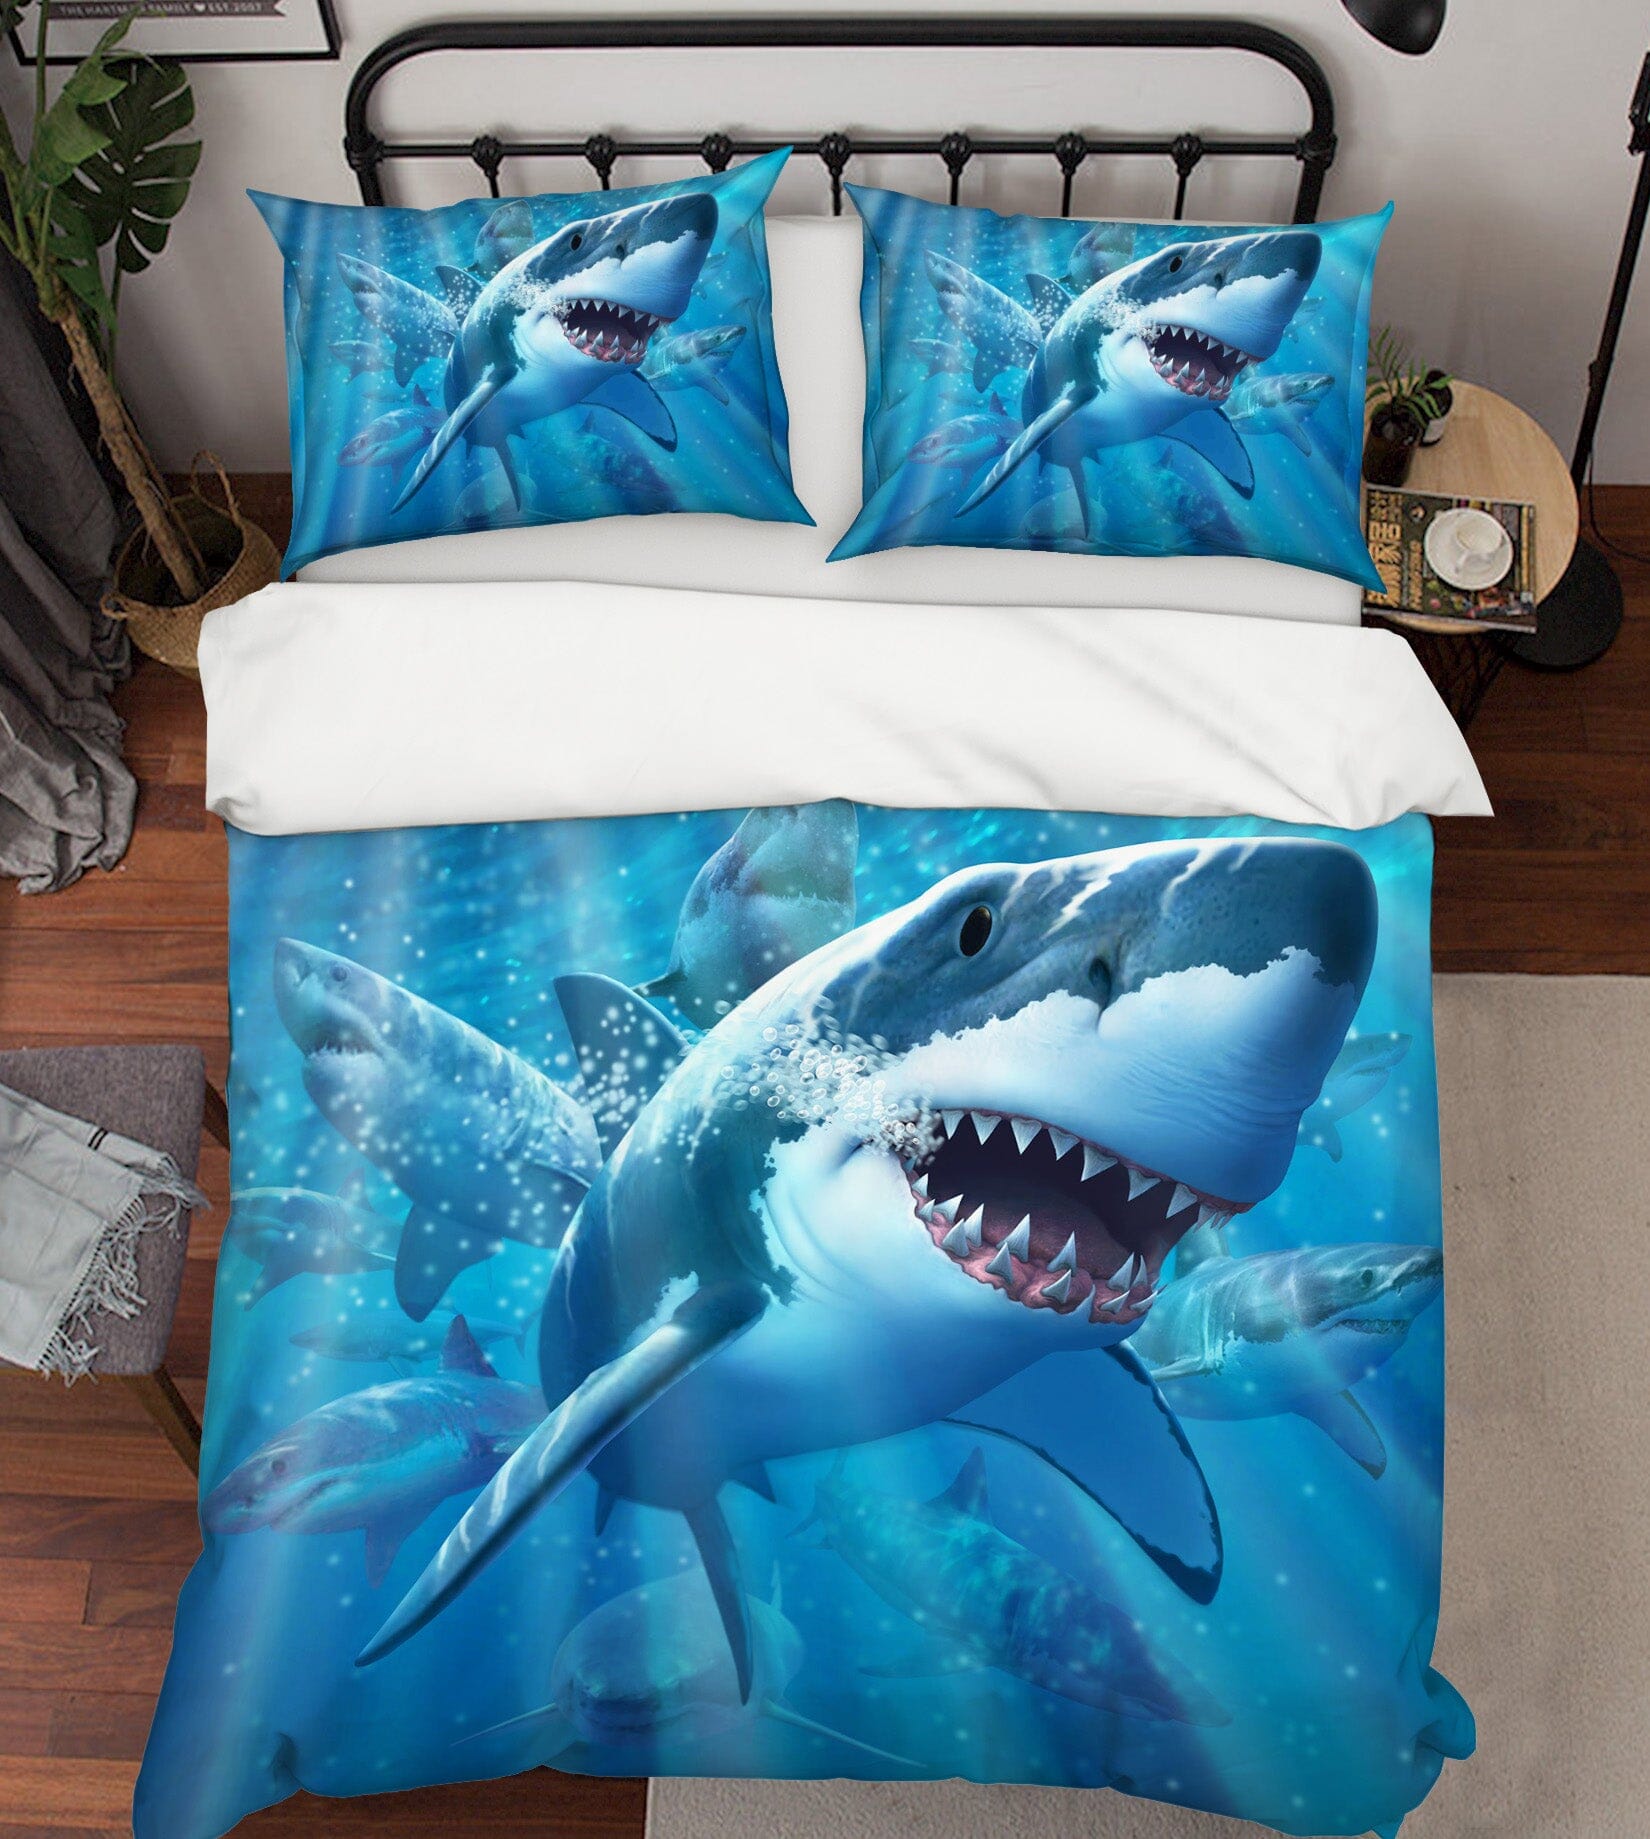 3D Great White Shark 2106 Jerry LoFaro bedding Bed Pillowcases Quilt Quiet Covers AJ Creativity Home 